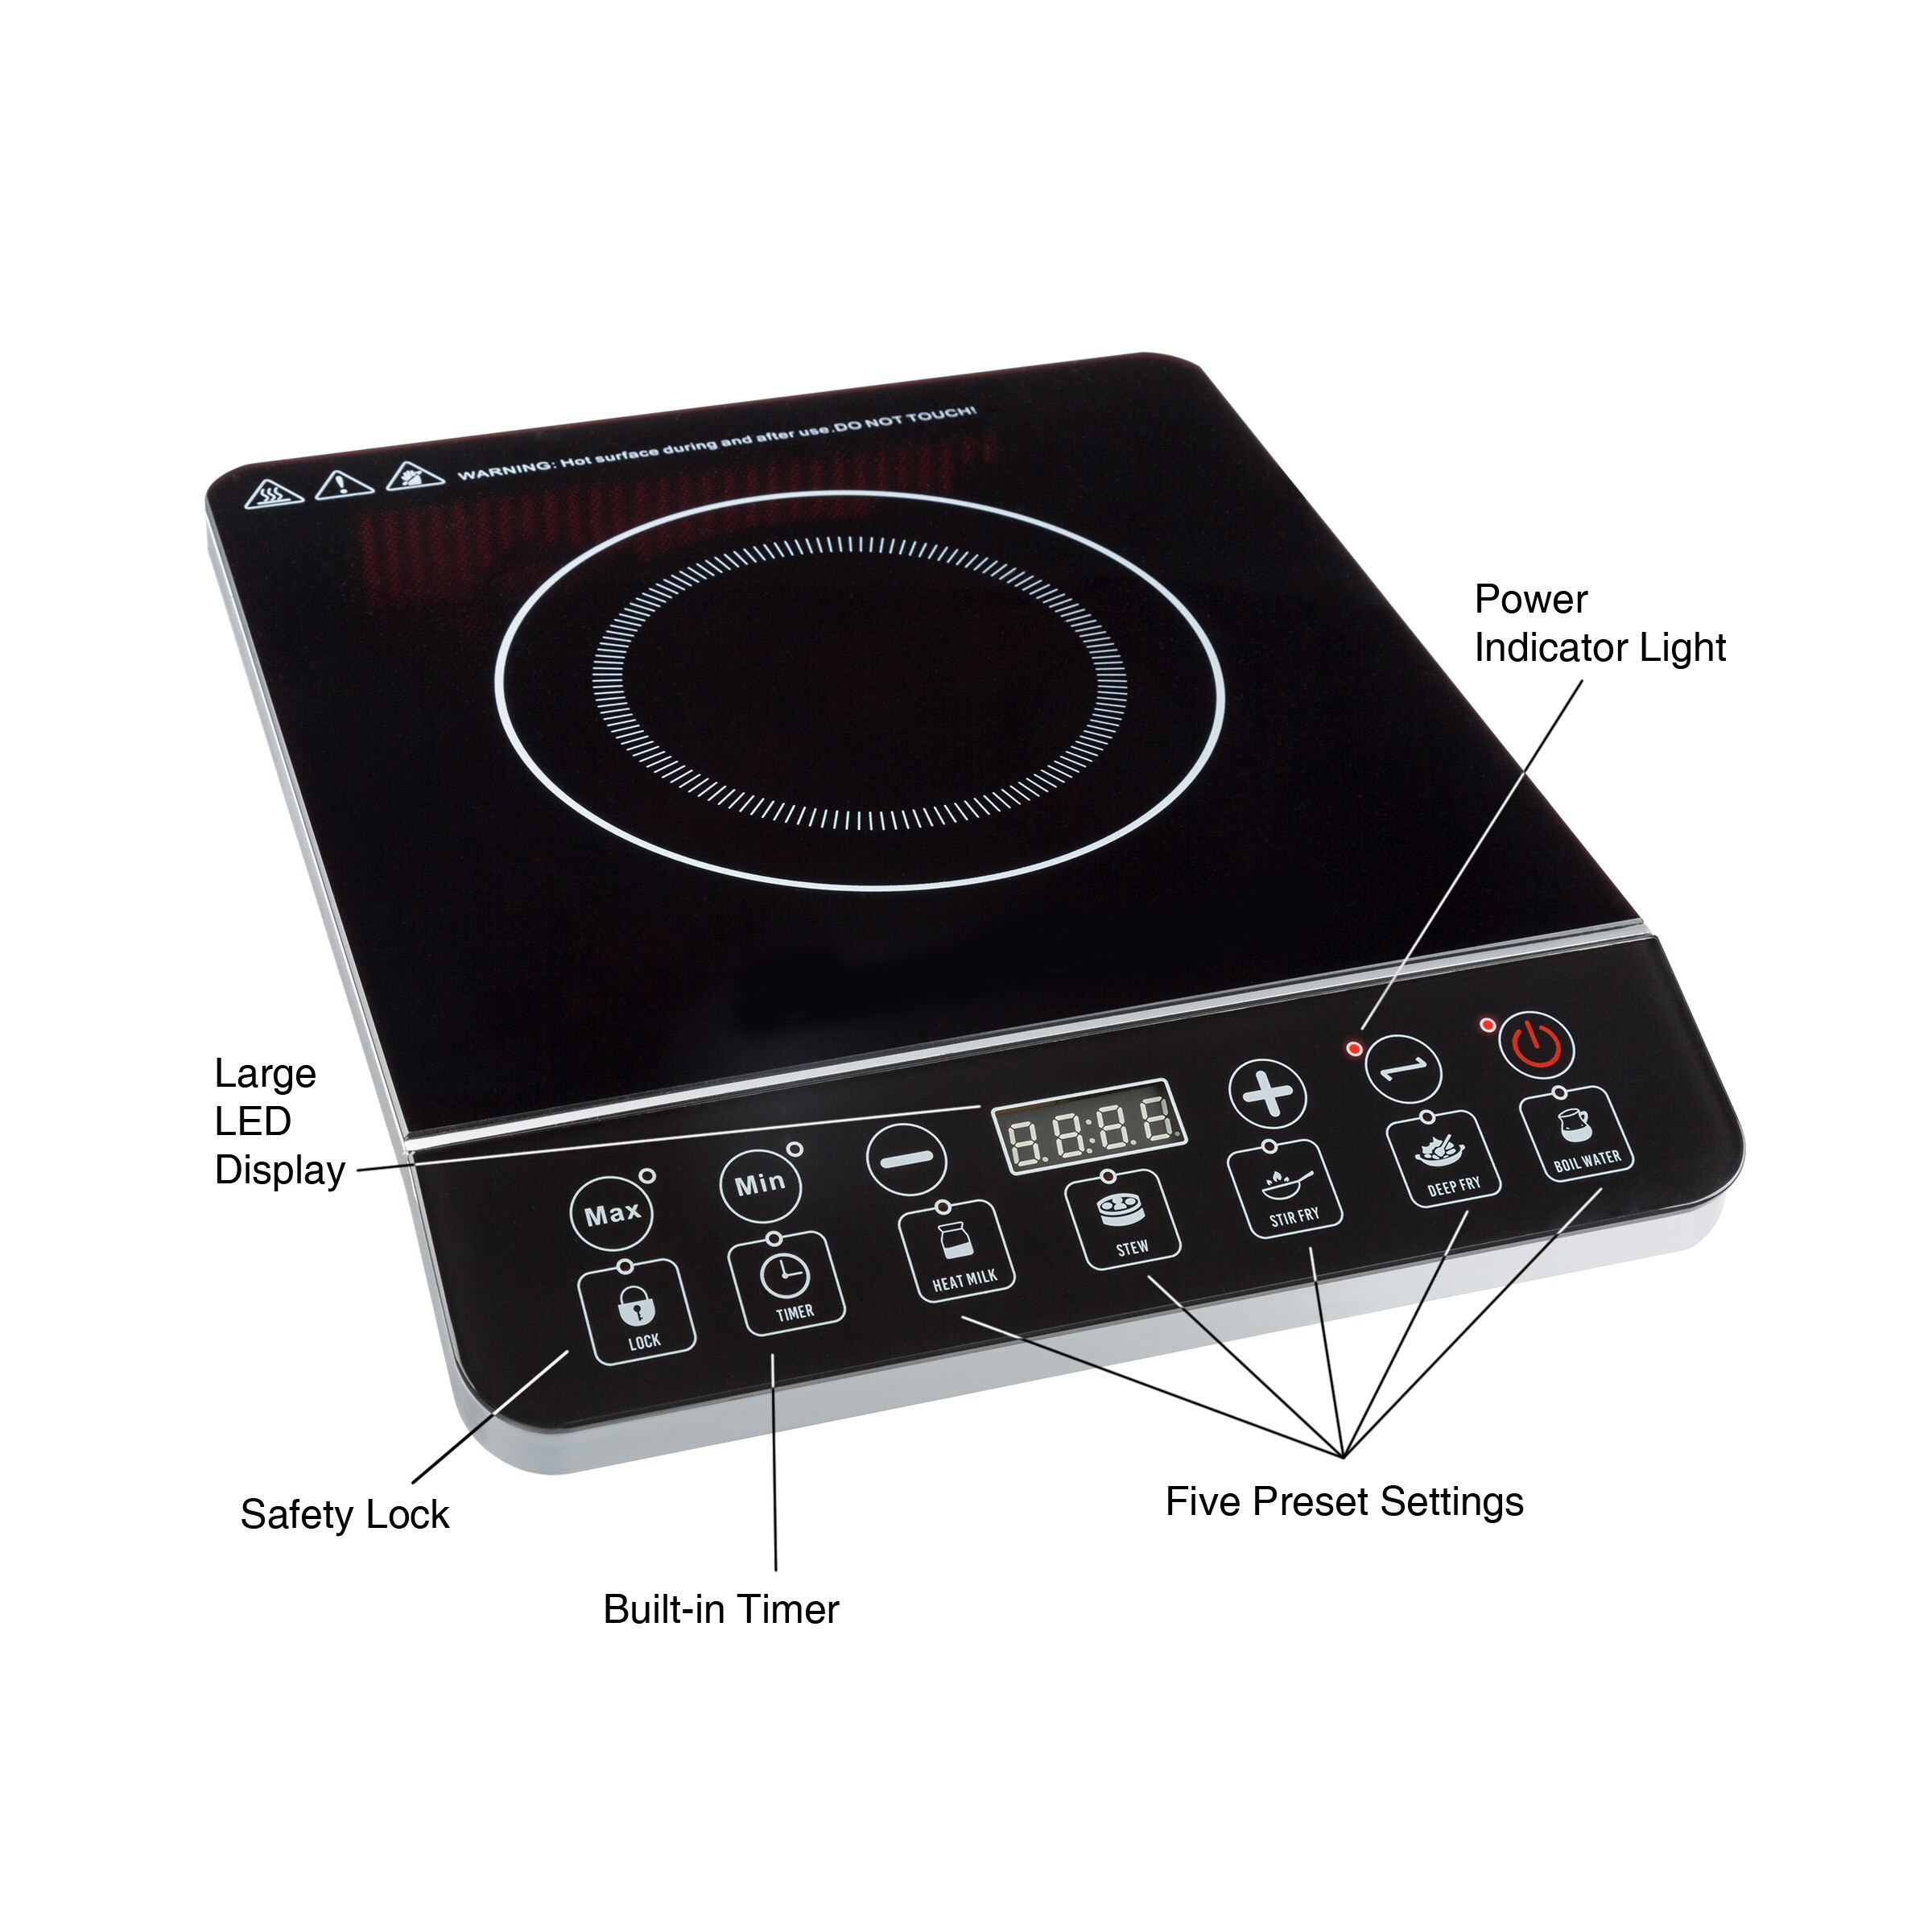 Upgraded to 1800W Single Burner,Electric Cooktop,Hot Plate for Cooking, Electric